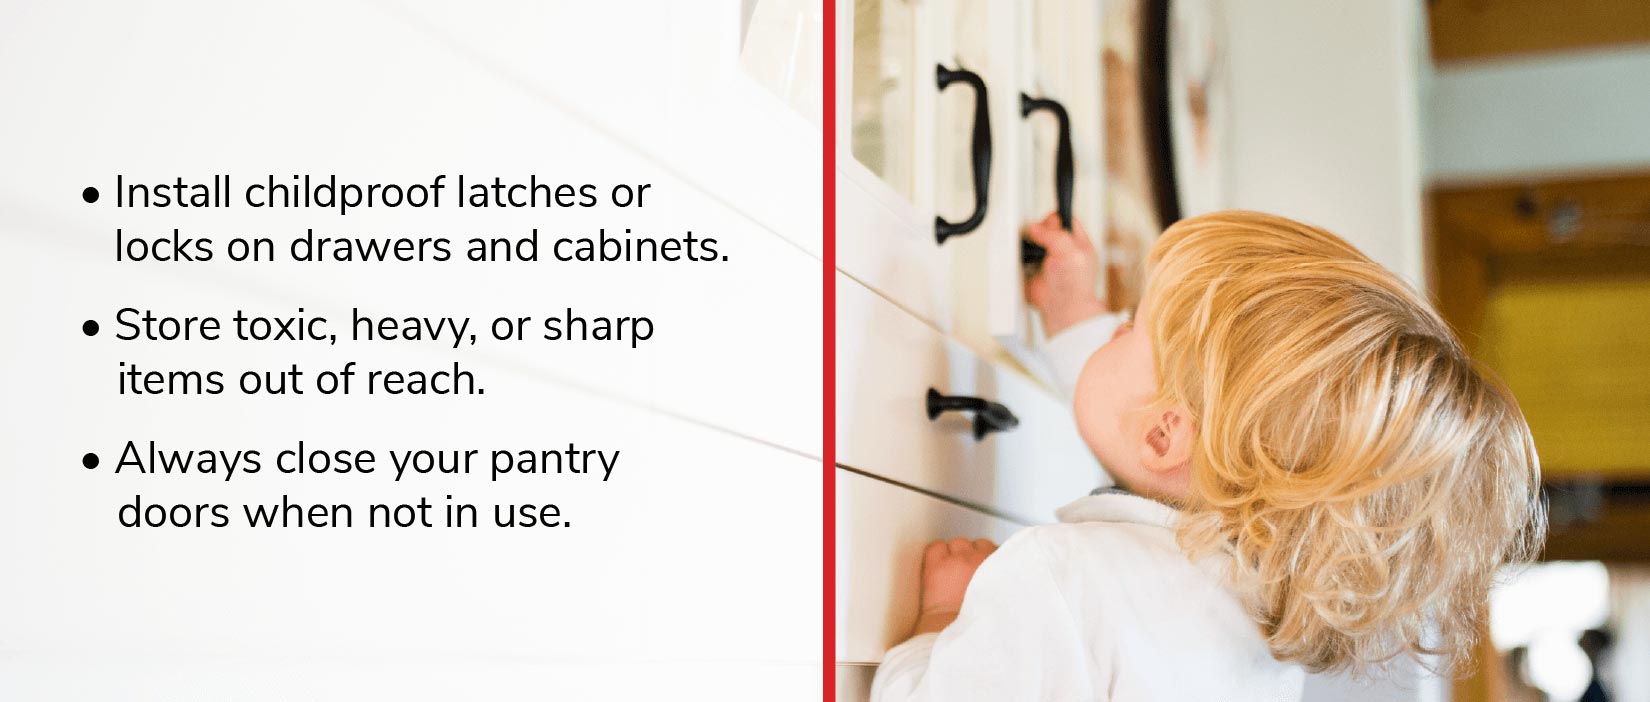 Blond child trying to open kitchen cabinet with text overlay on baby proofing.